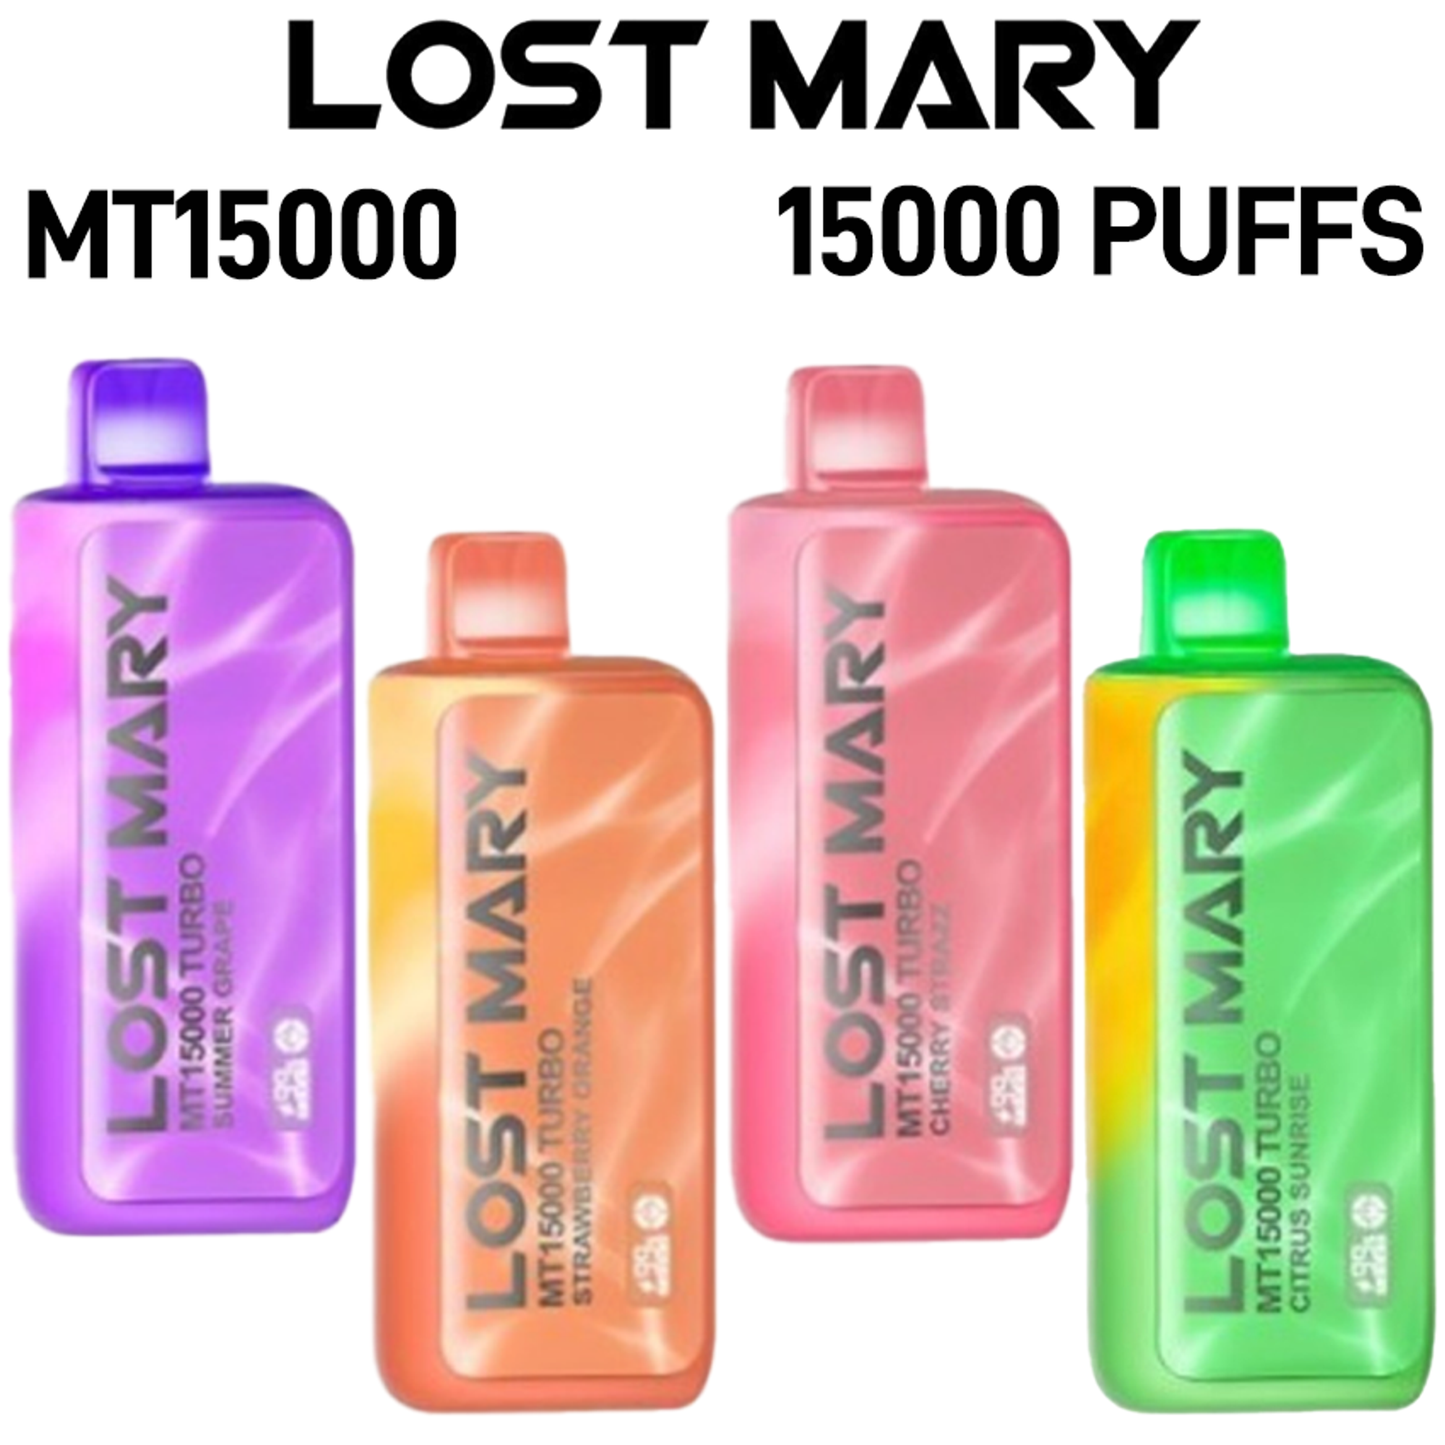 Lost Mary MT15000 Disposable Vape